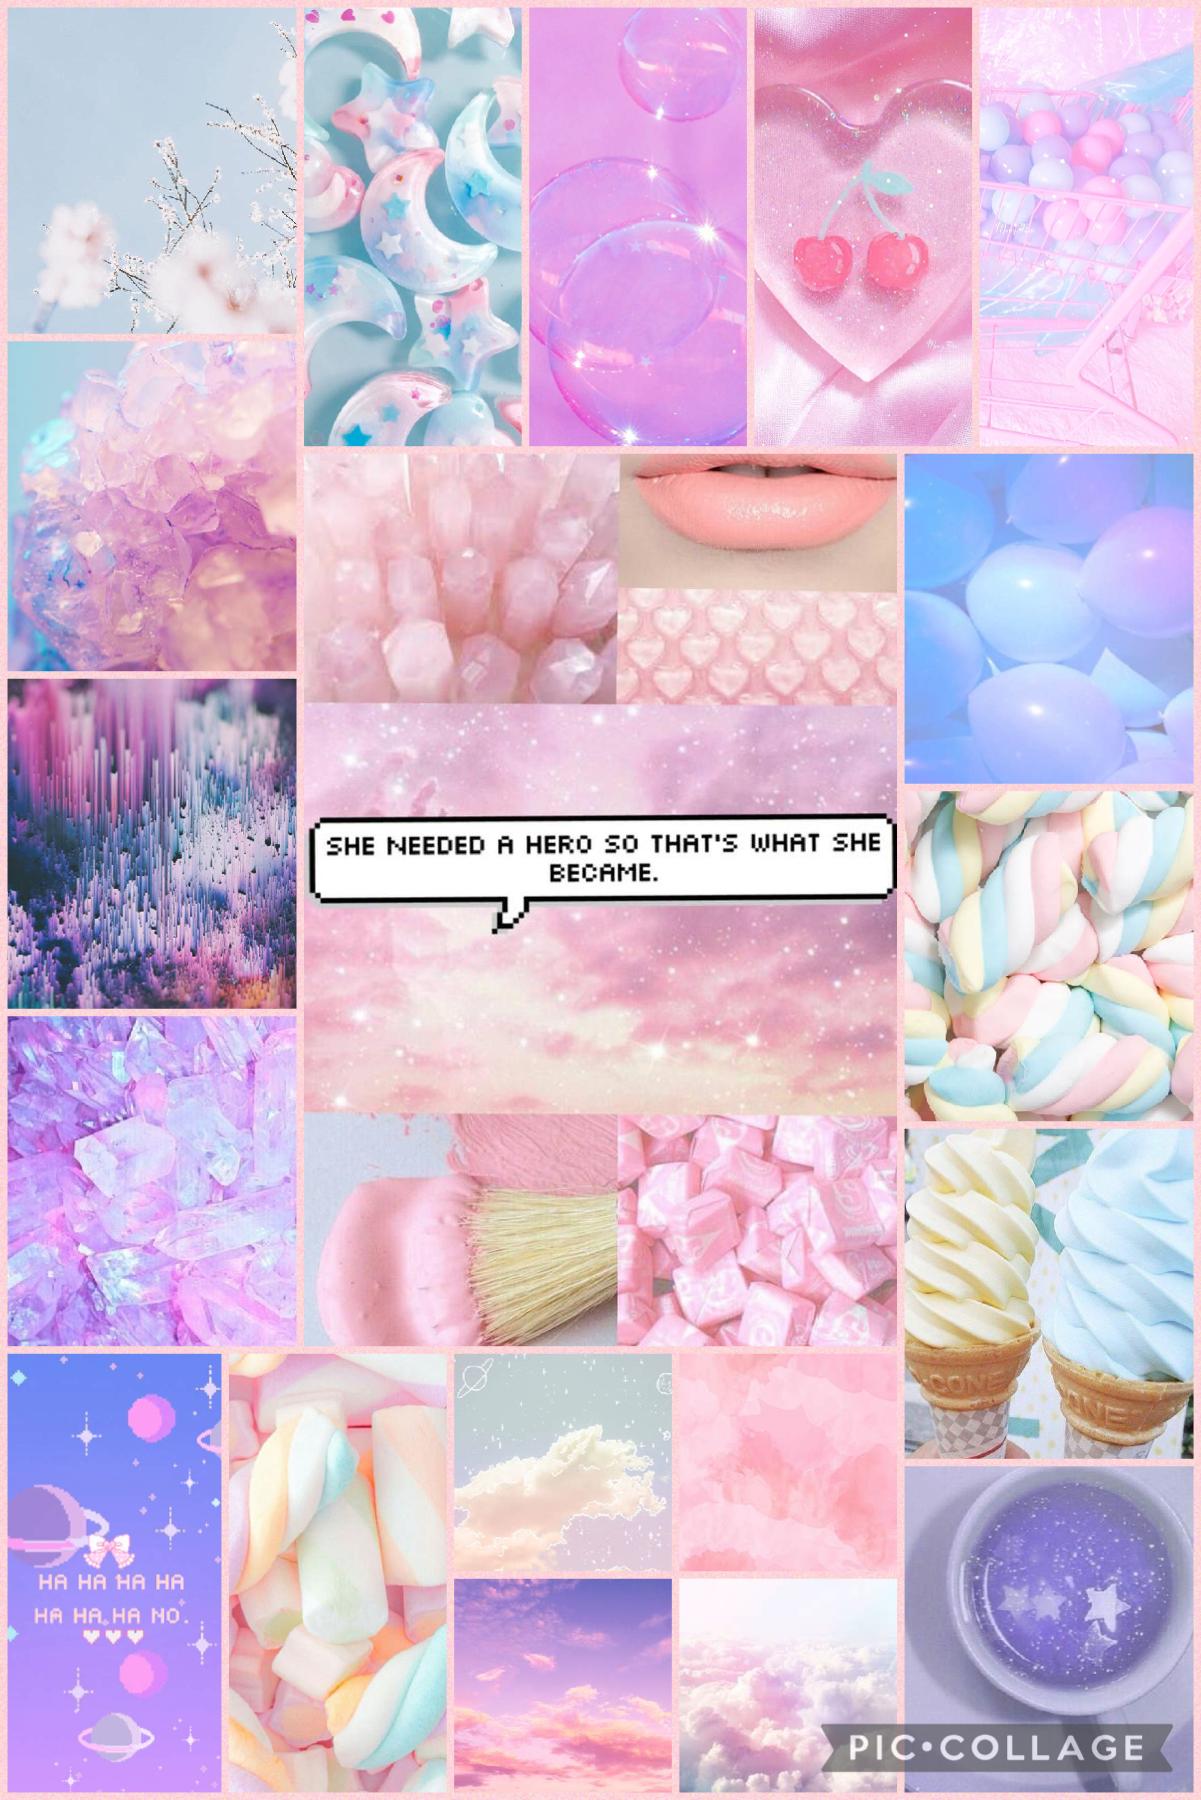 🌸tap🌸
Here is some pastel pink aesthetic, I’m going back full time tomorrow for school and I’m nervous 😬. If you read this put in the comments if you are in 4(5) days a week and if you are nervous going back too. Also, thank you guys so much for all the f